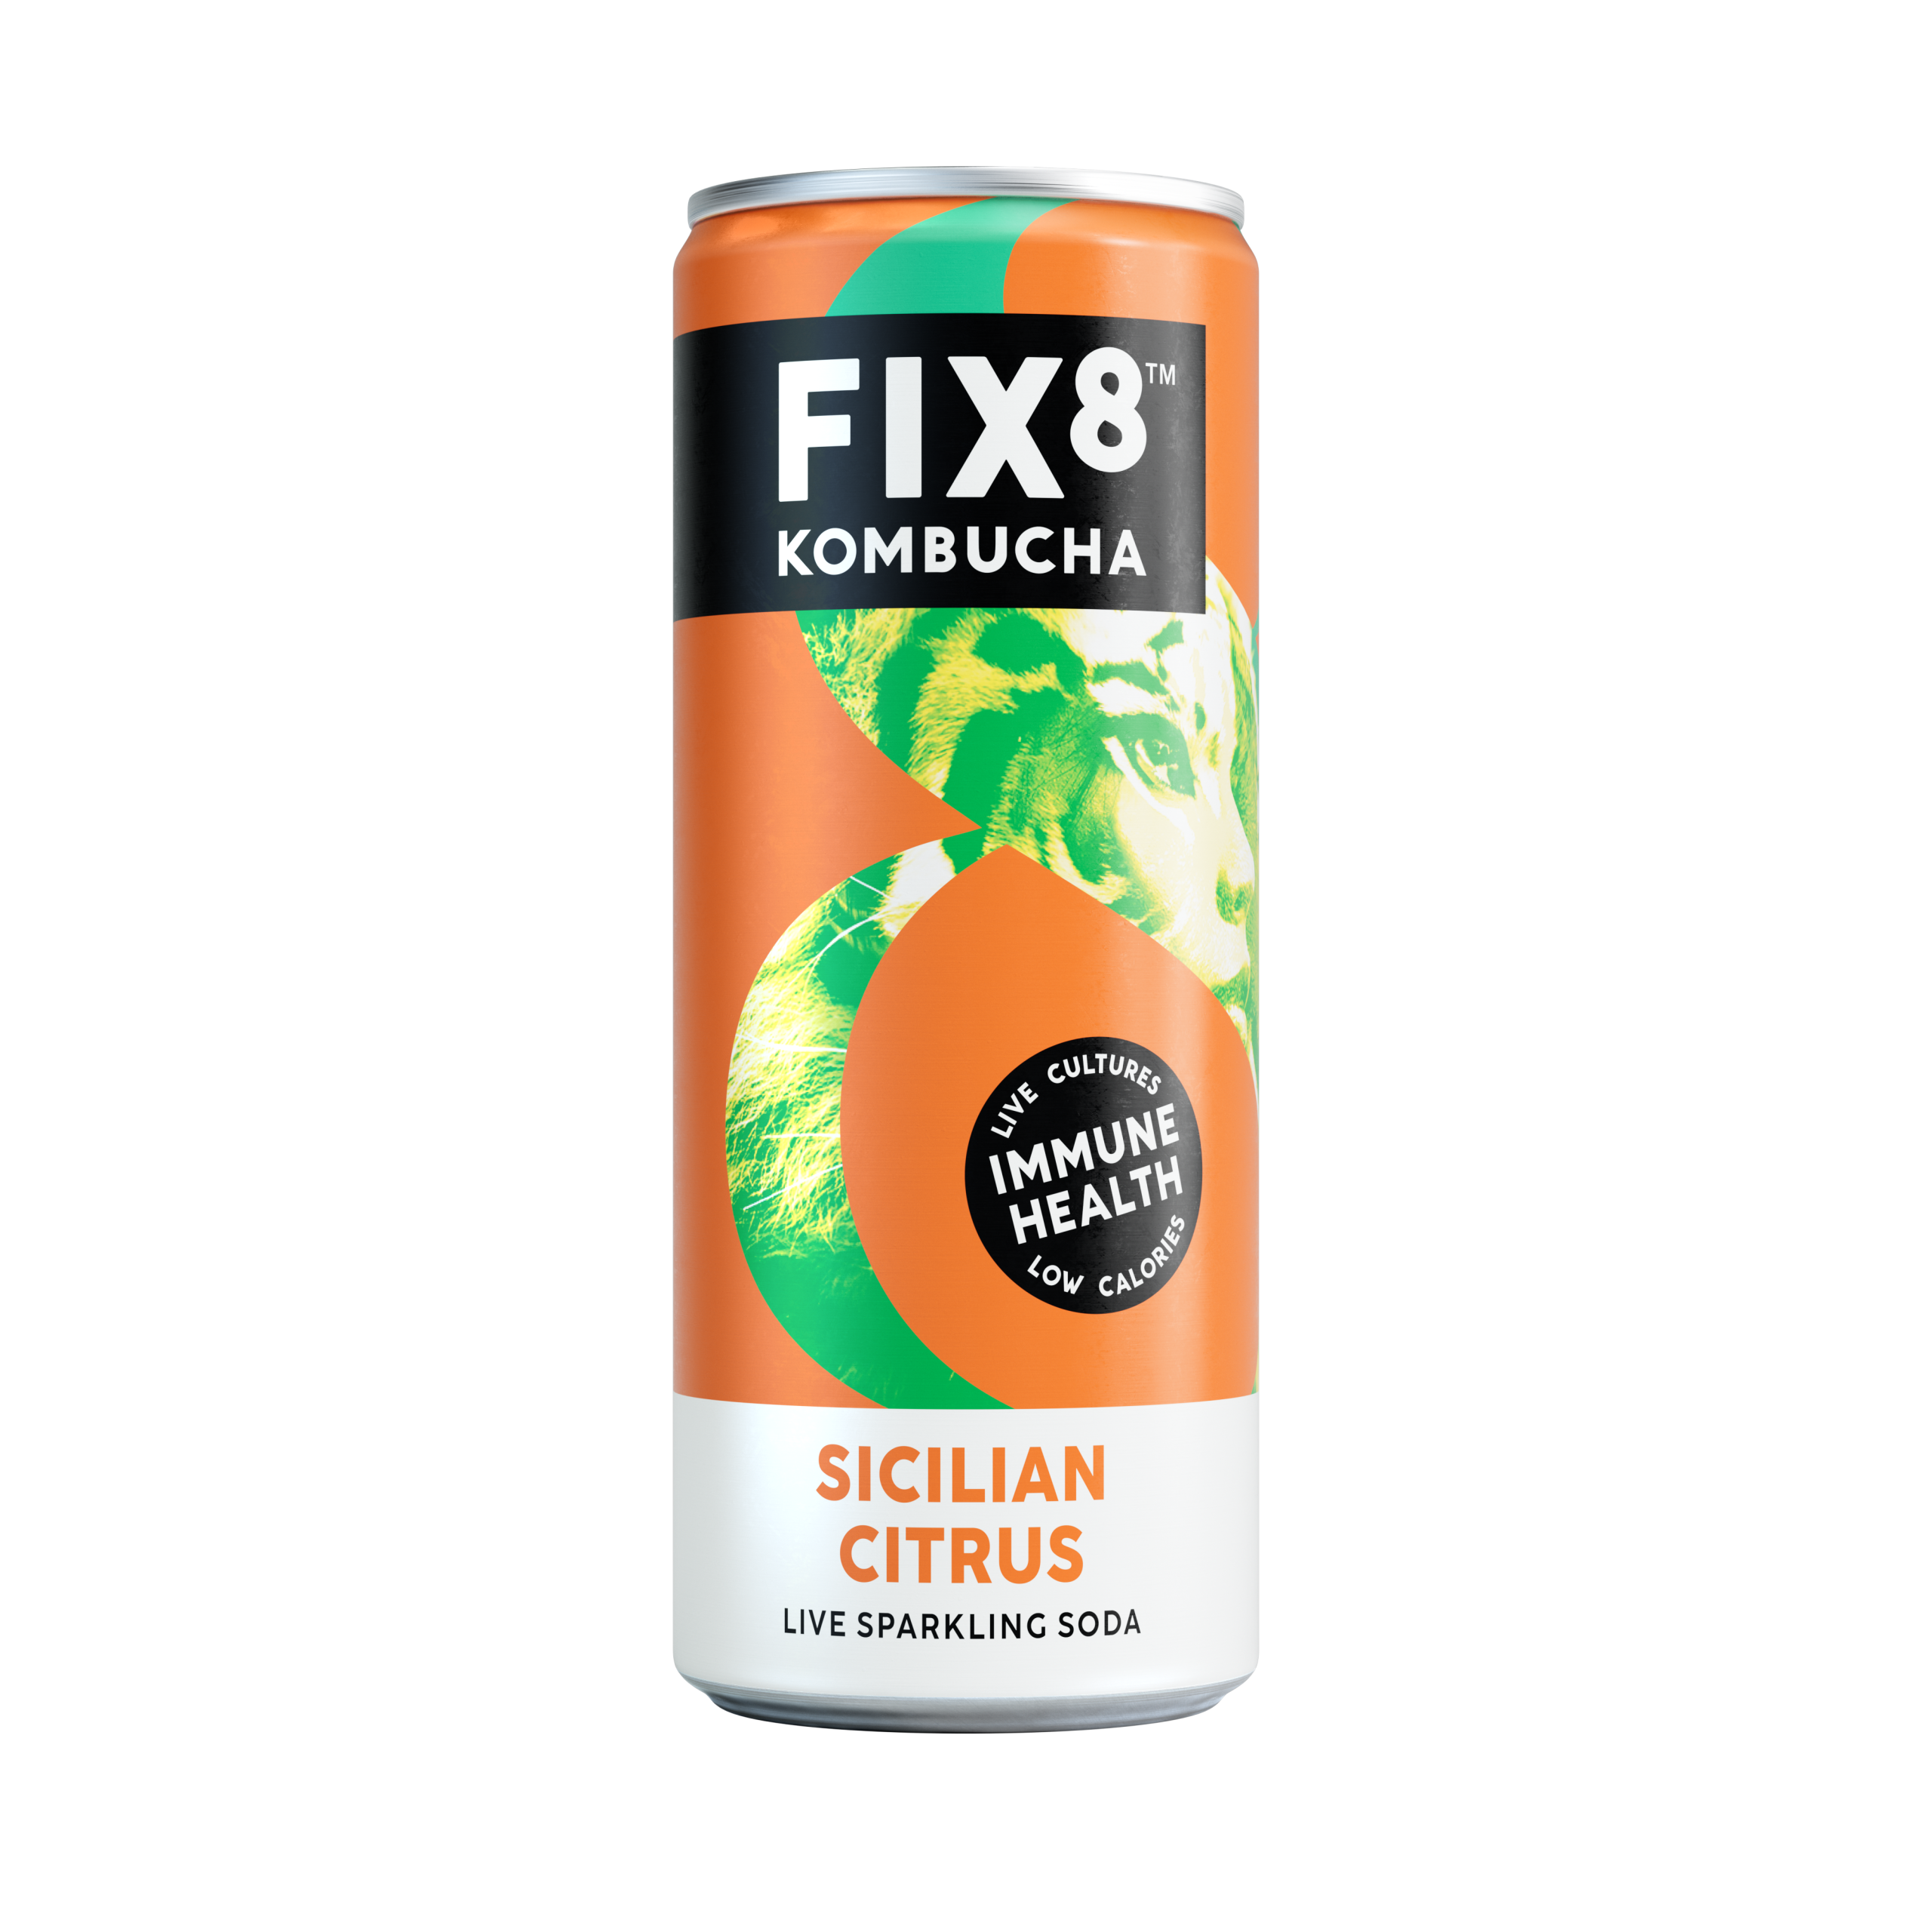 Fix8 Kombucha is the first to feature probiotic live cultures and vitamin C